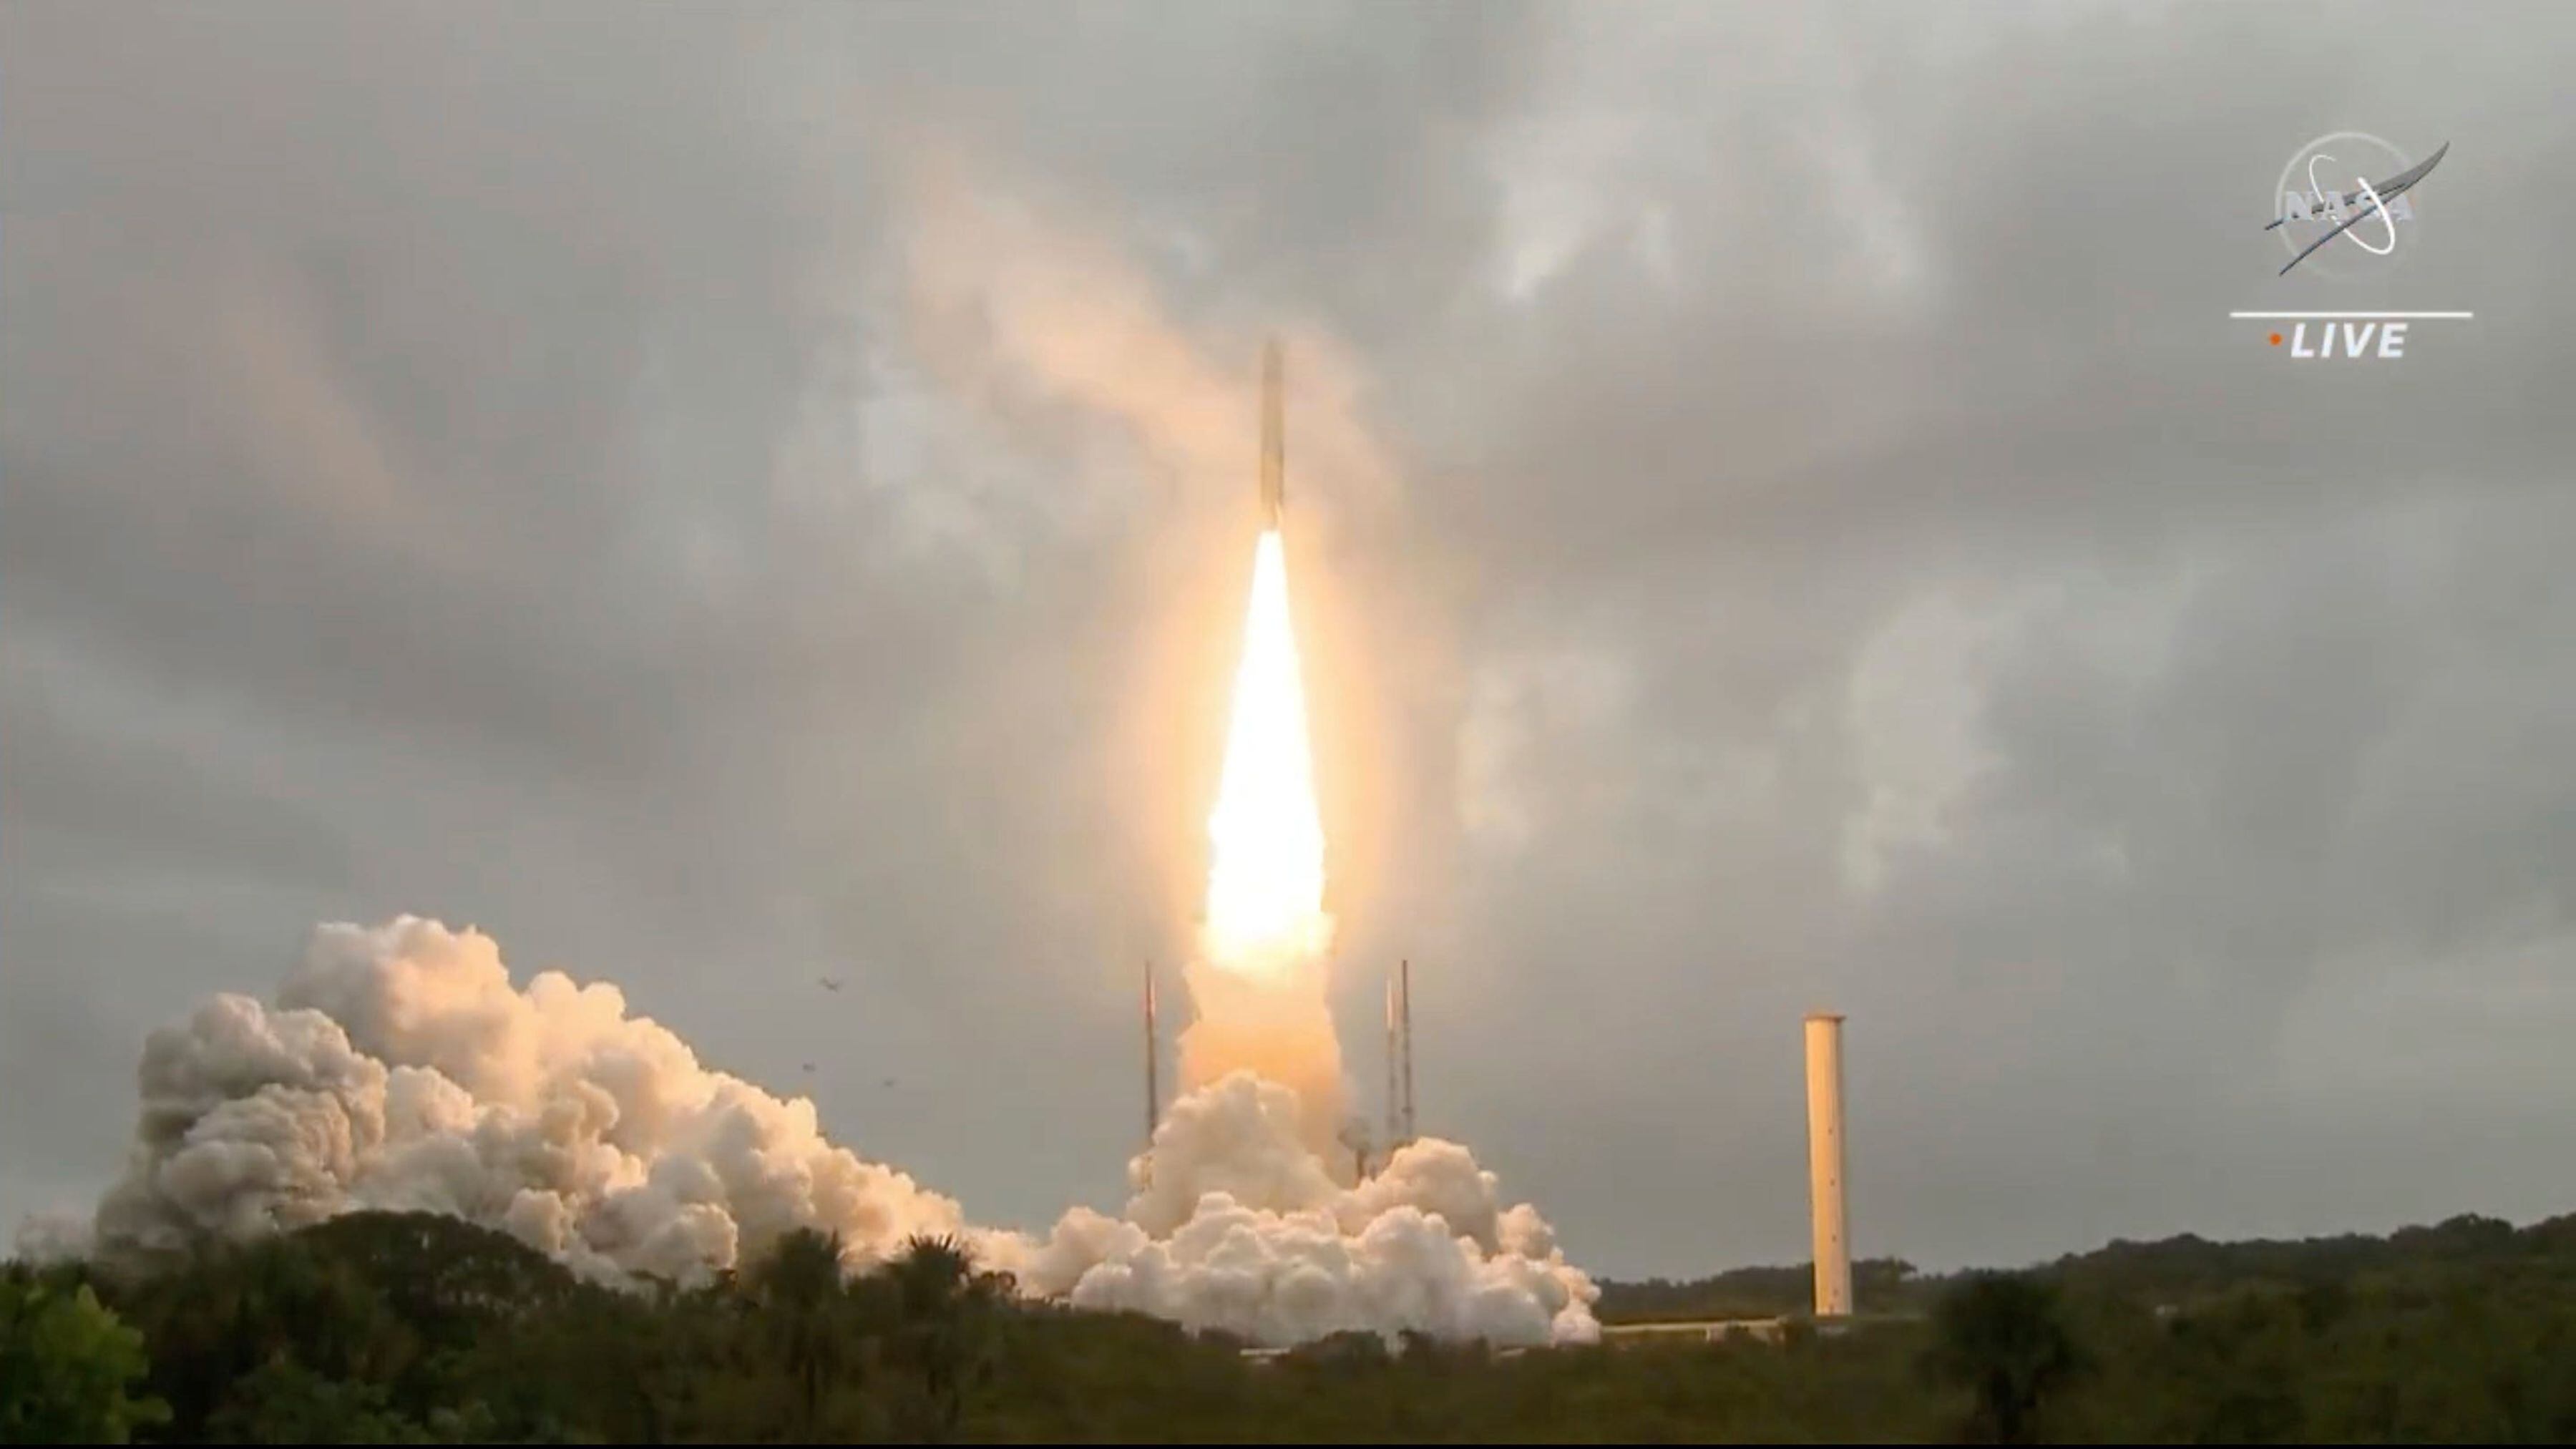 The James Webb Space Telescope blasted off from Kourou spaceport in French Guiana.